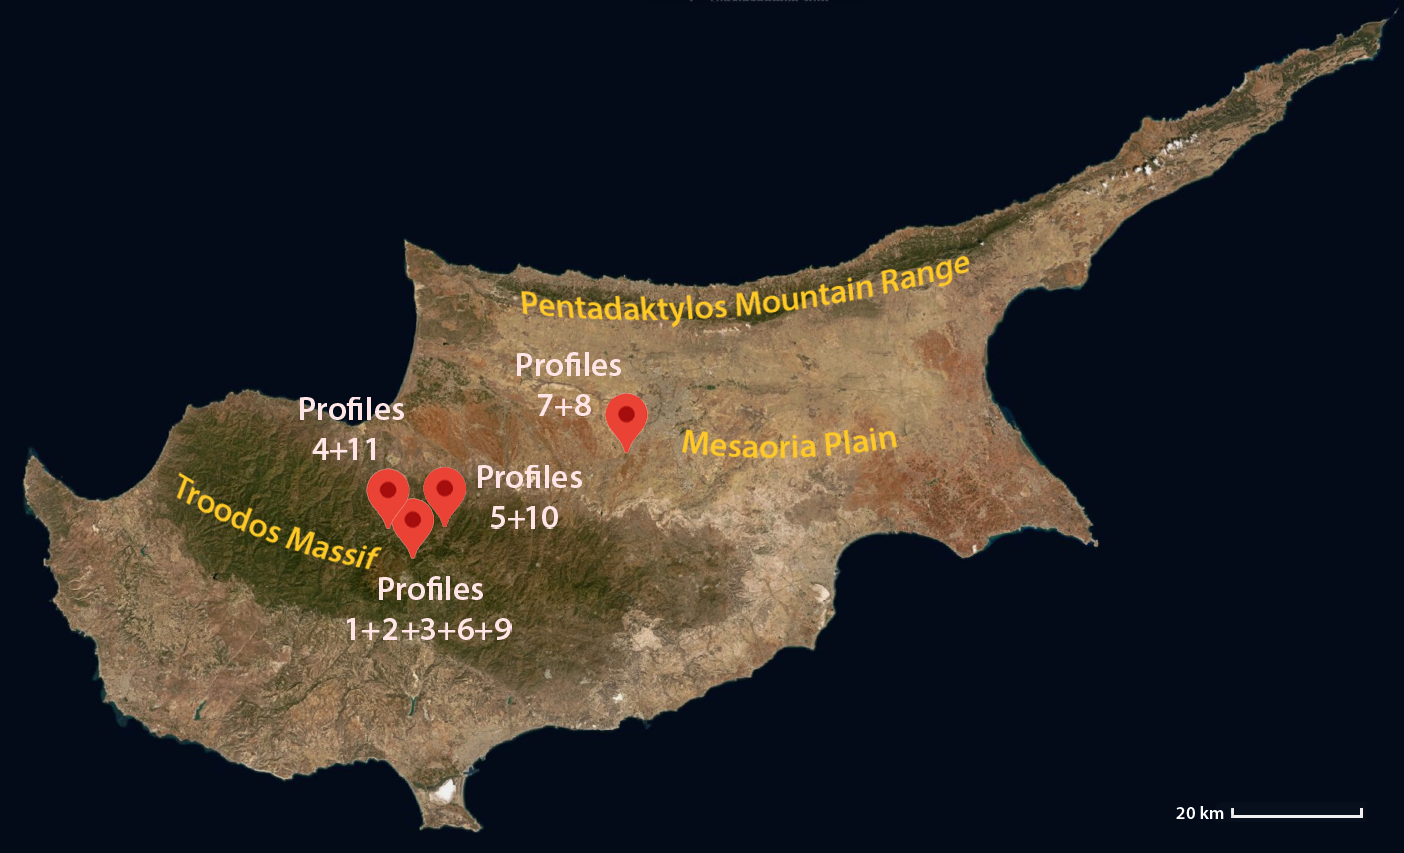 Study areas Cyprus, source: https://www.openstreetmap.org/edit#map=9/35.1043/32.9225,  Open Database license (ODbL) 1.0